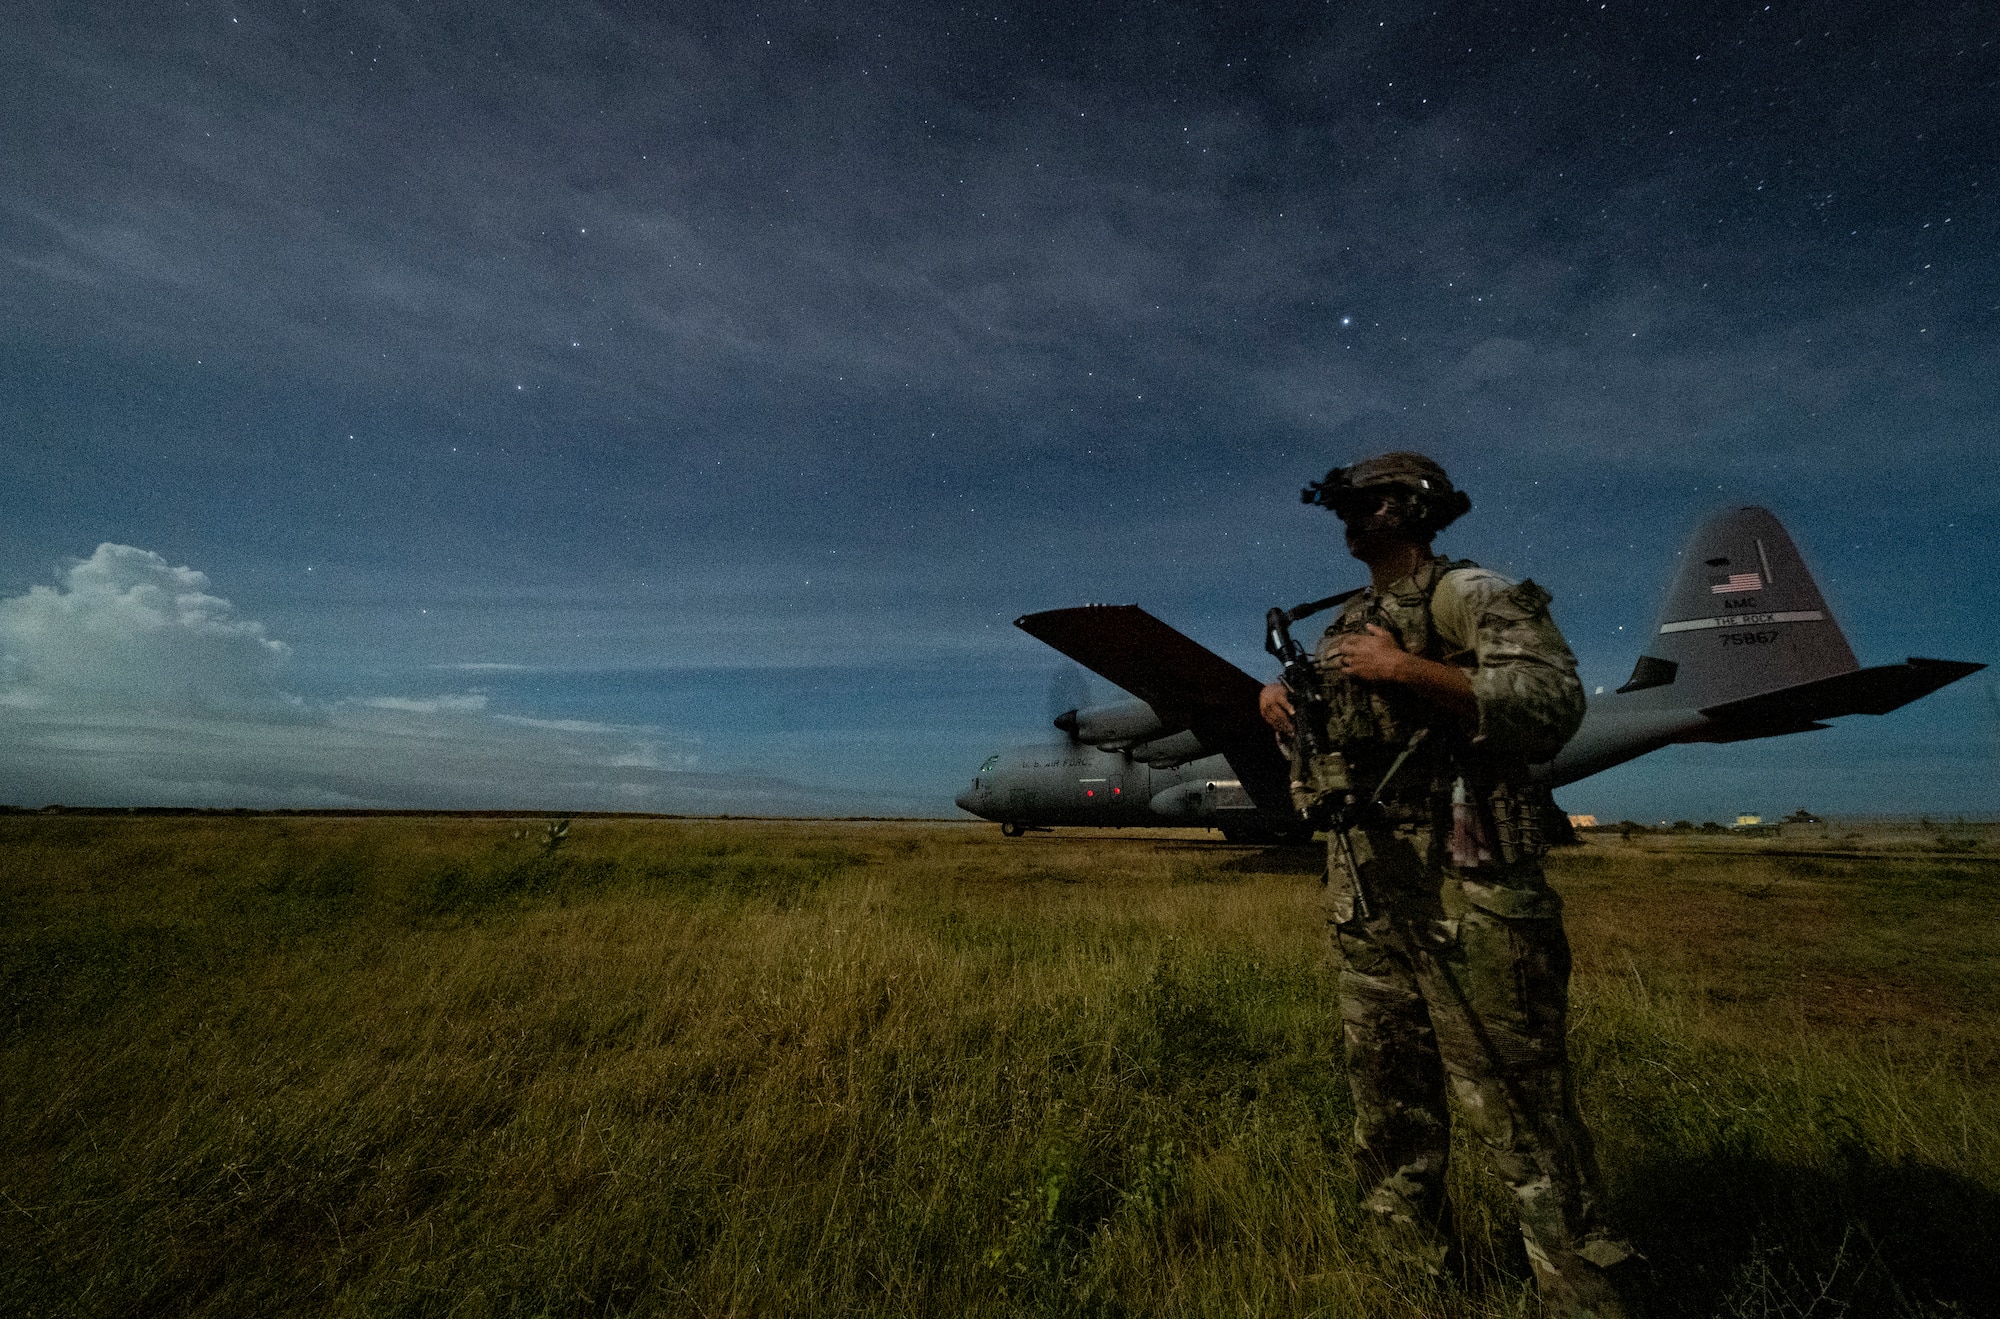 U.S. Army Spc. Kevin Martin, junior sniper, assigned to the 1-186th Infantry Battalion, Task Force Guardian, Combined Joint Task Force – Horn of Africa (CJTF-HOA), provides security for a 75th Expeditionary Airlift Squadron (EAS) C-130J Super Hercules during unloading operations in Somalia, June 28, 2020. Task Force Guardian provides base security and force protection for CJFT-HOA personnel and U.S. partner forces deployed in the region. (U.S. Air Force photo by Tech. Sgt. Christopher Ruano)